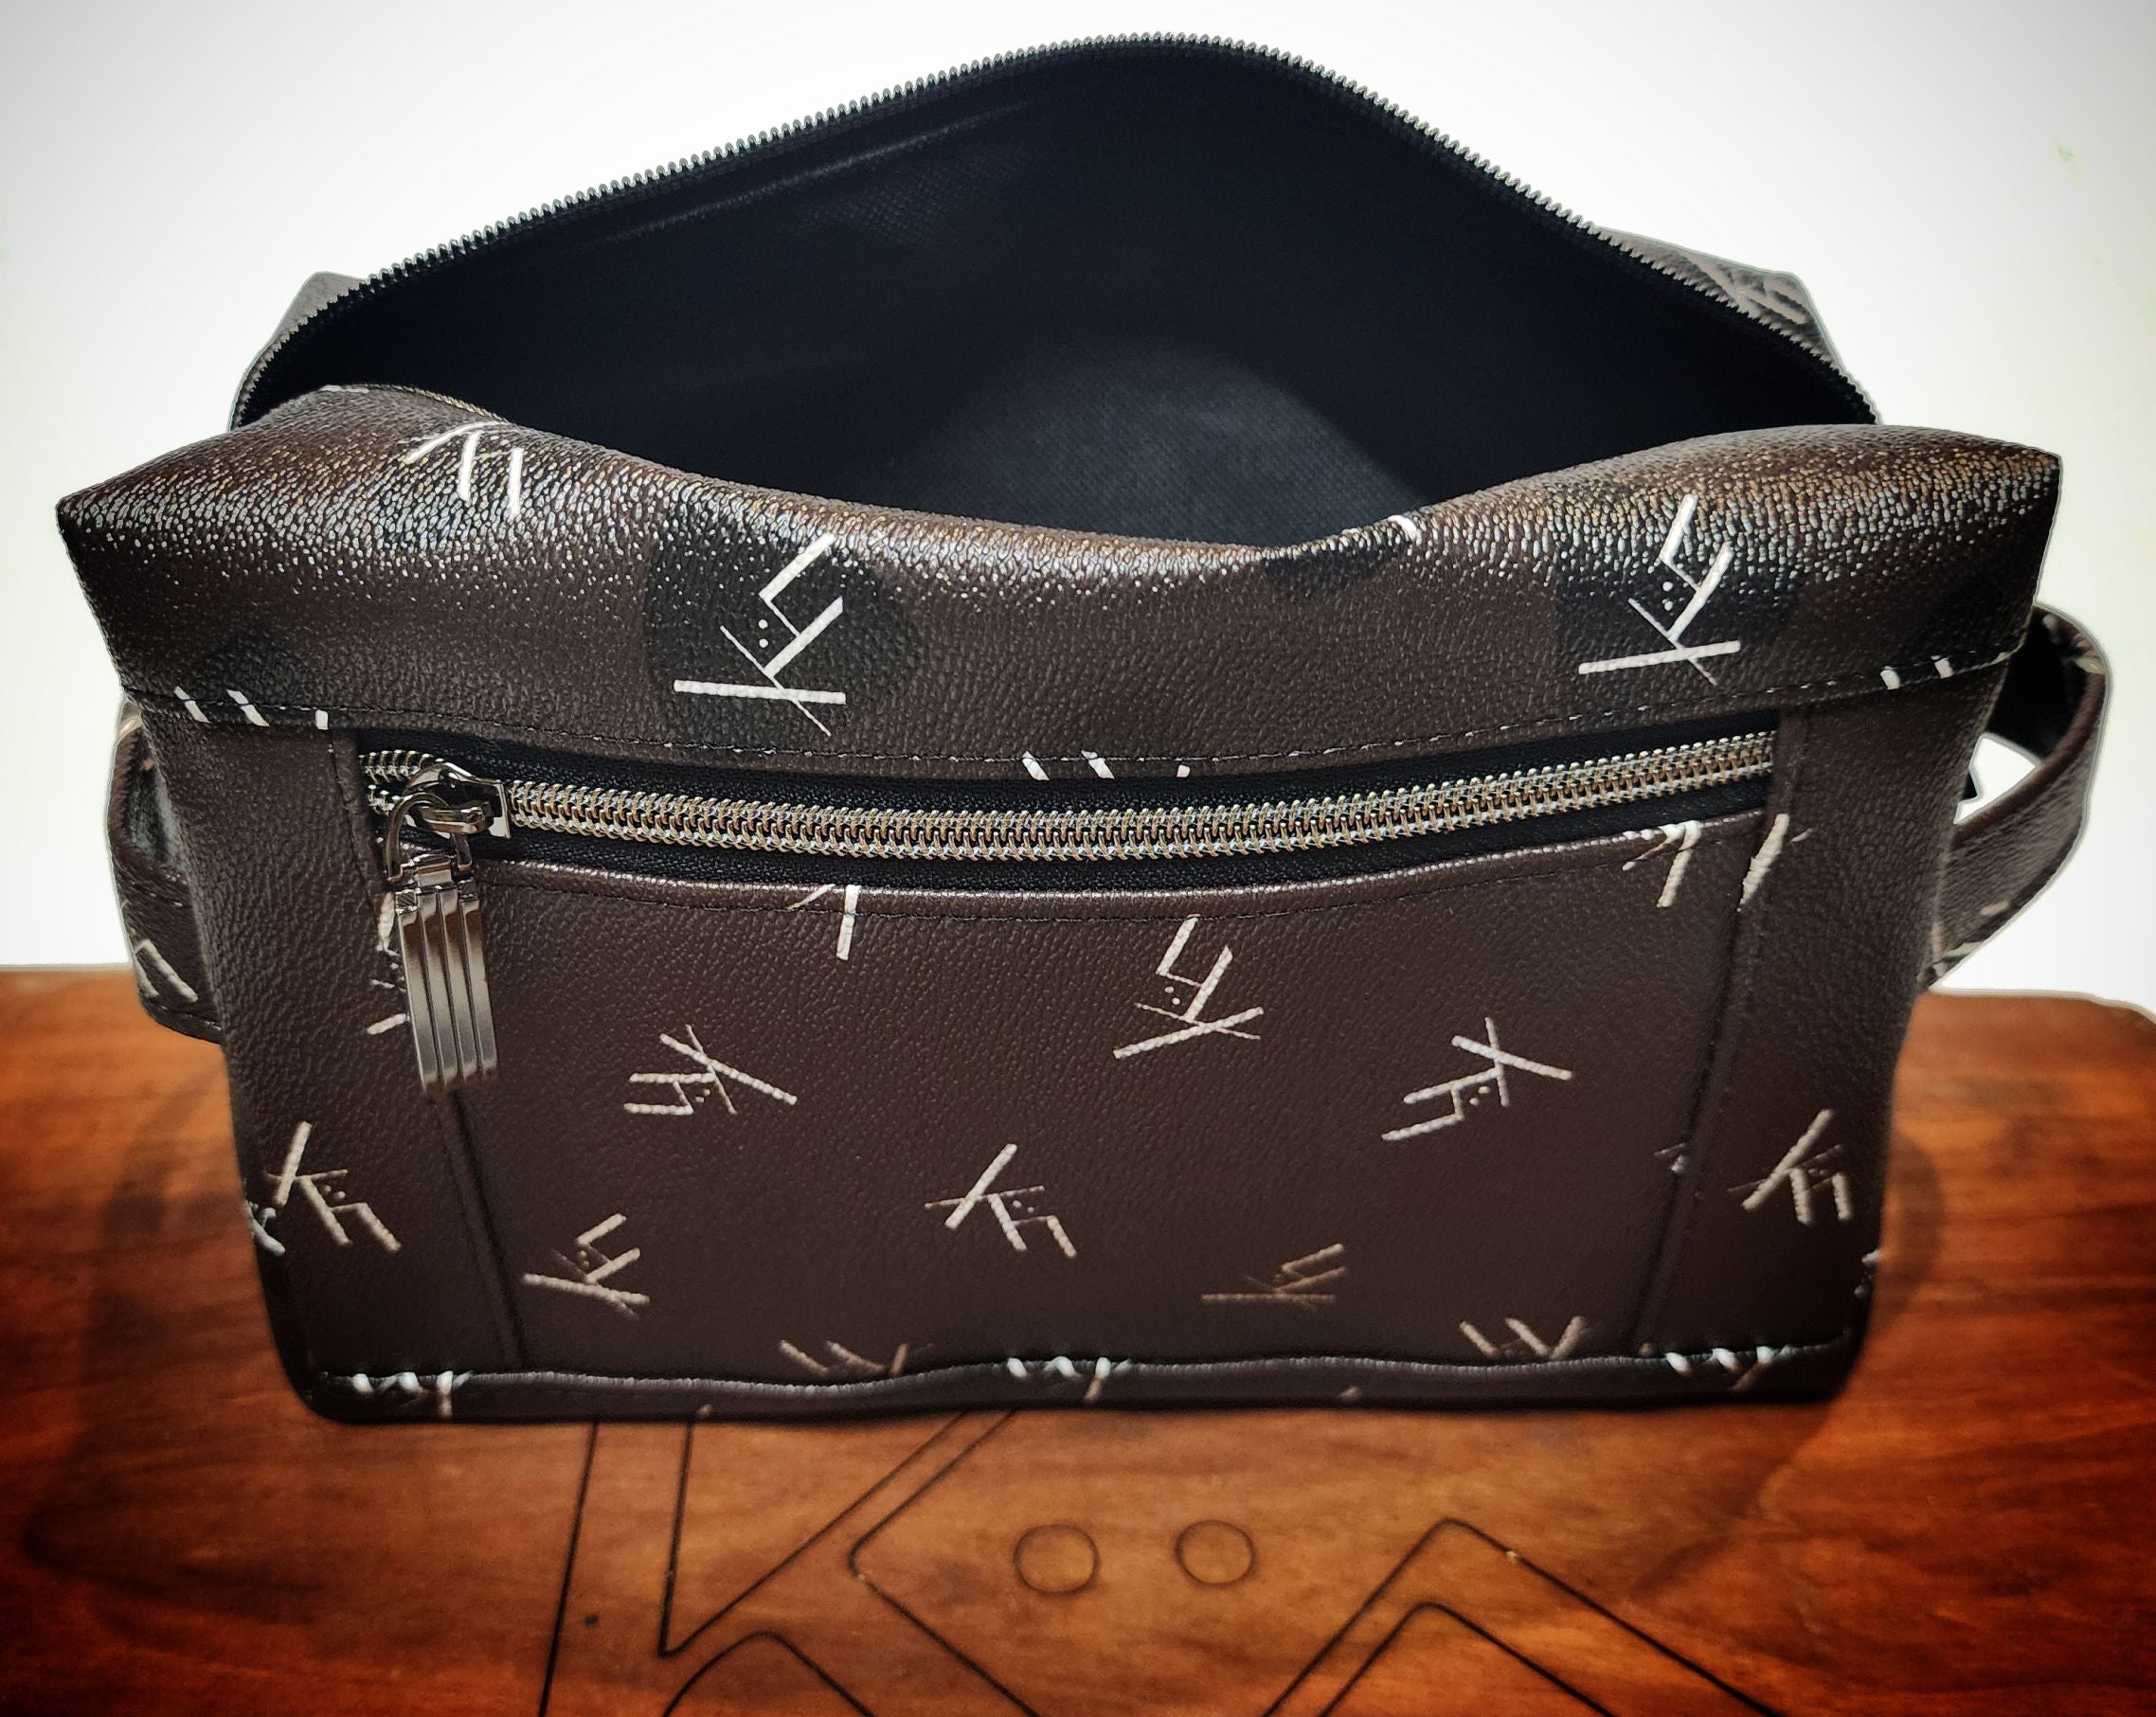 Toiletry bag dopp kit from kühn products dark brown with white logo top view.